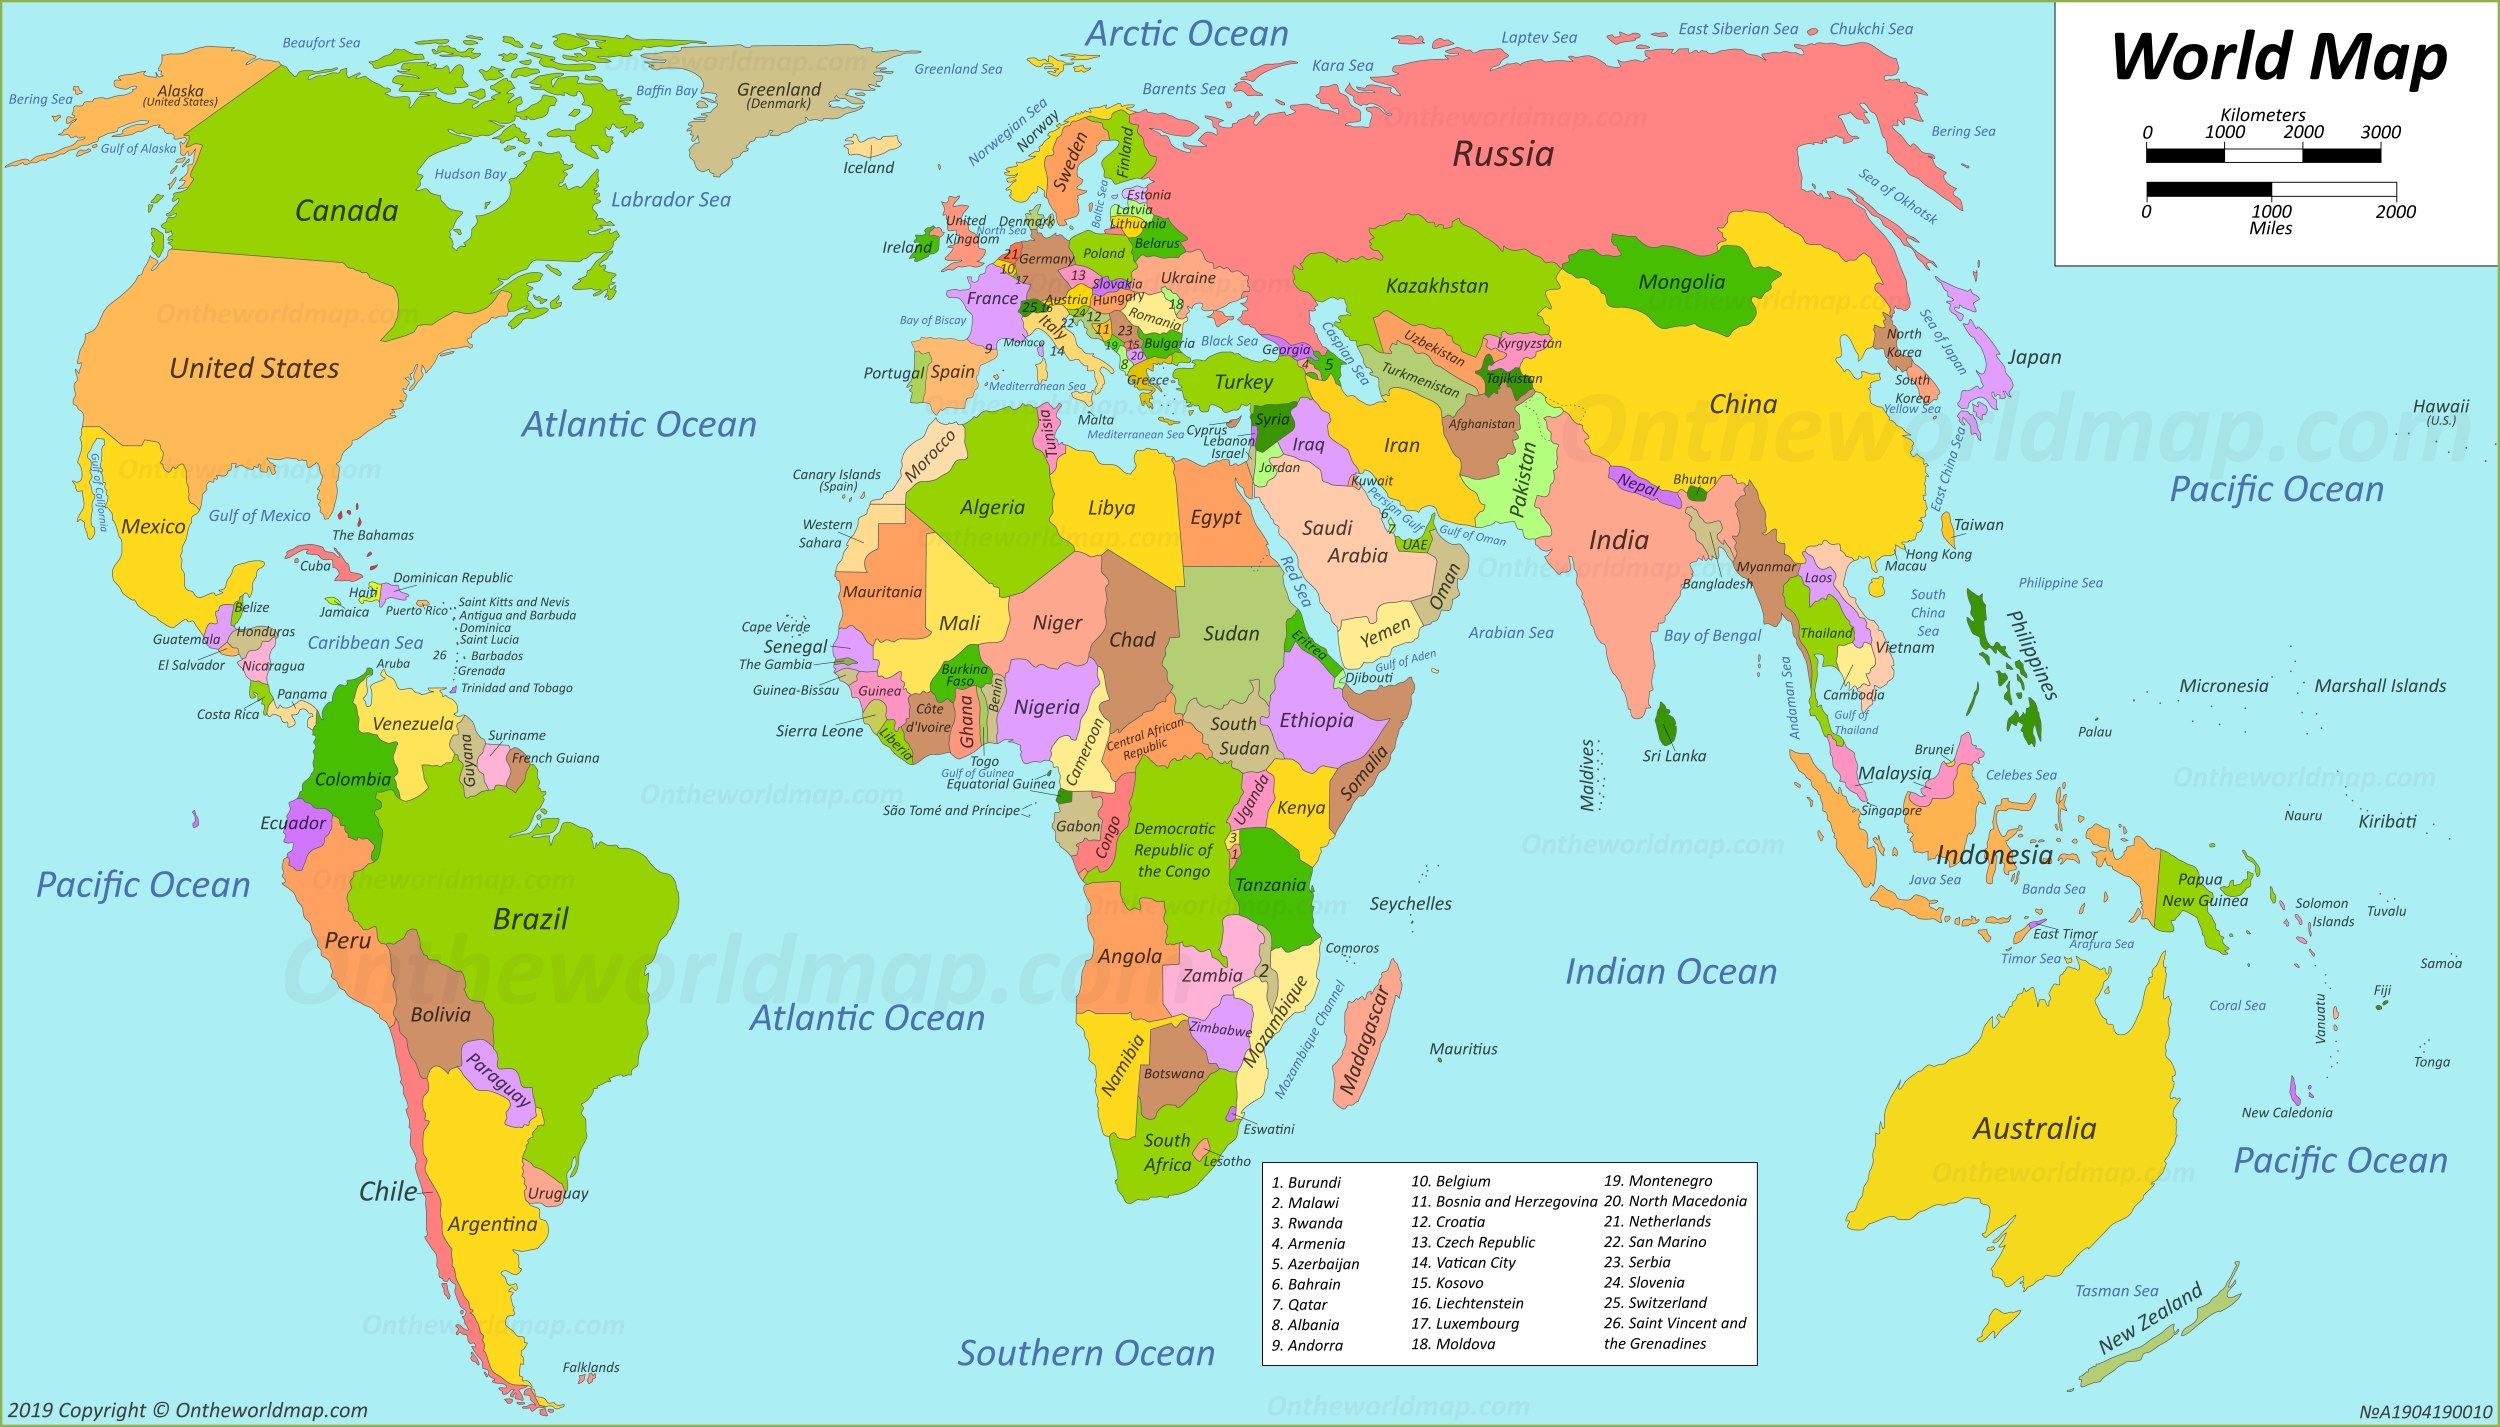 World Maps. Maps of all countries, cities and regions of The World